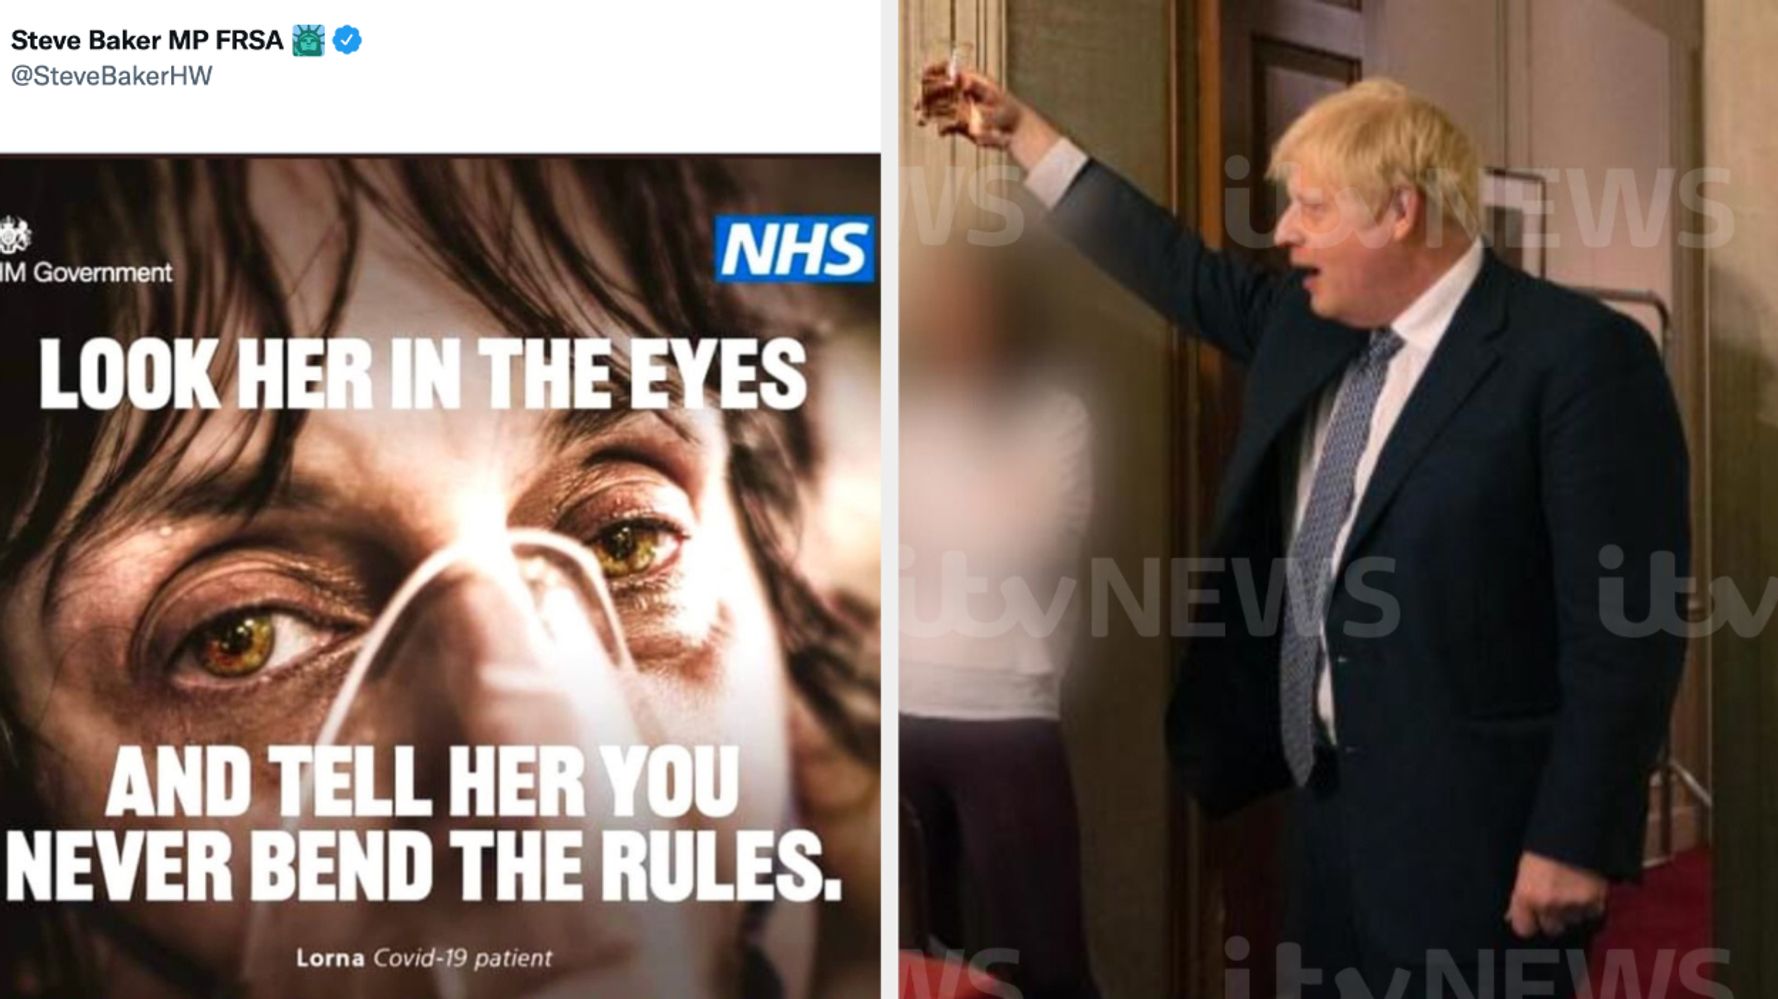 An Influential Tory MP's Reaction To The Partygate Photos Spells Danger For Boris Johnson